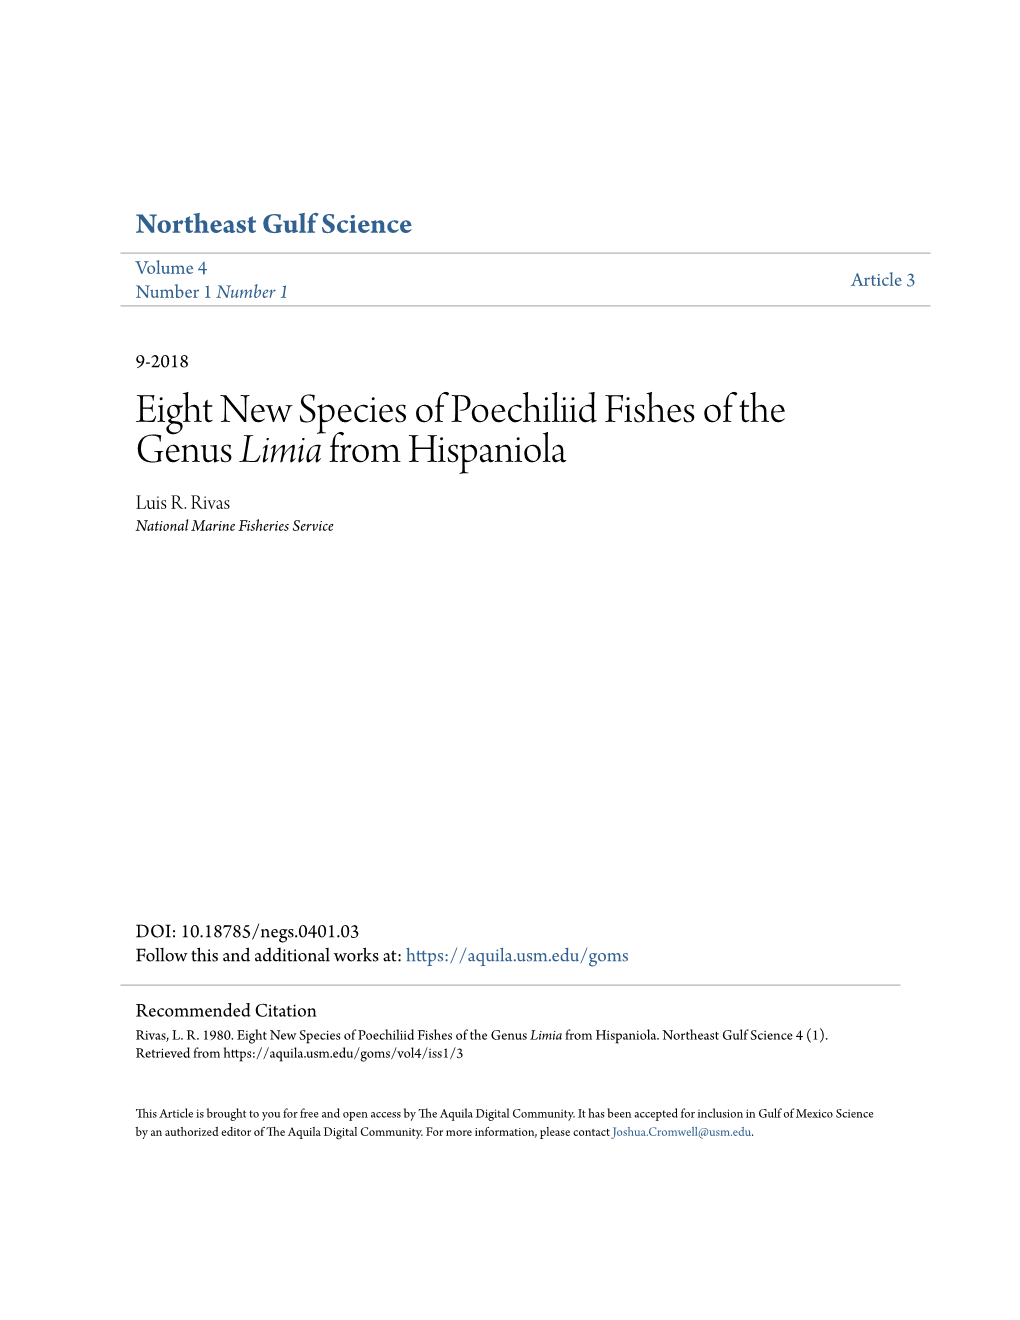 Eight New Species of Poechiliid Fishes of the Genus Limia from Hispaniola Luis R